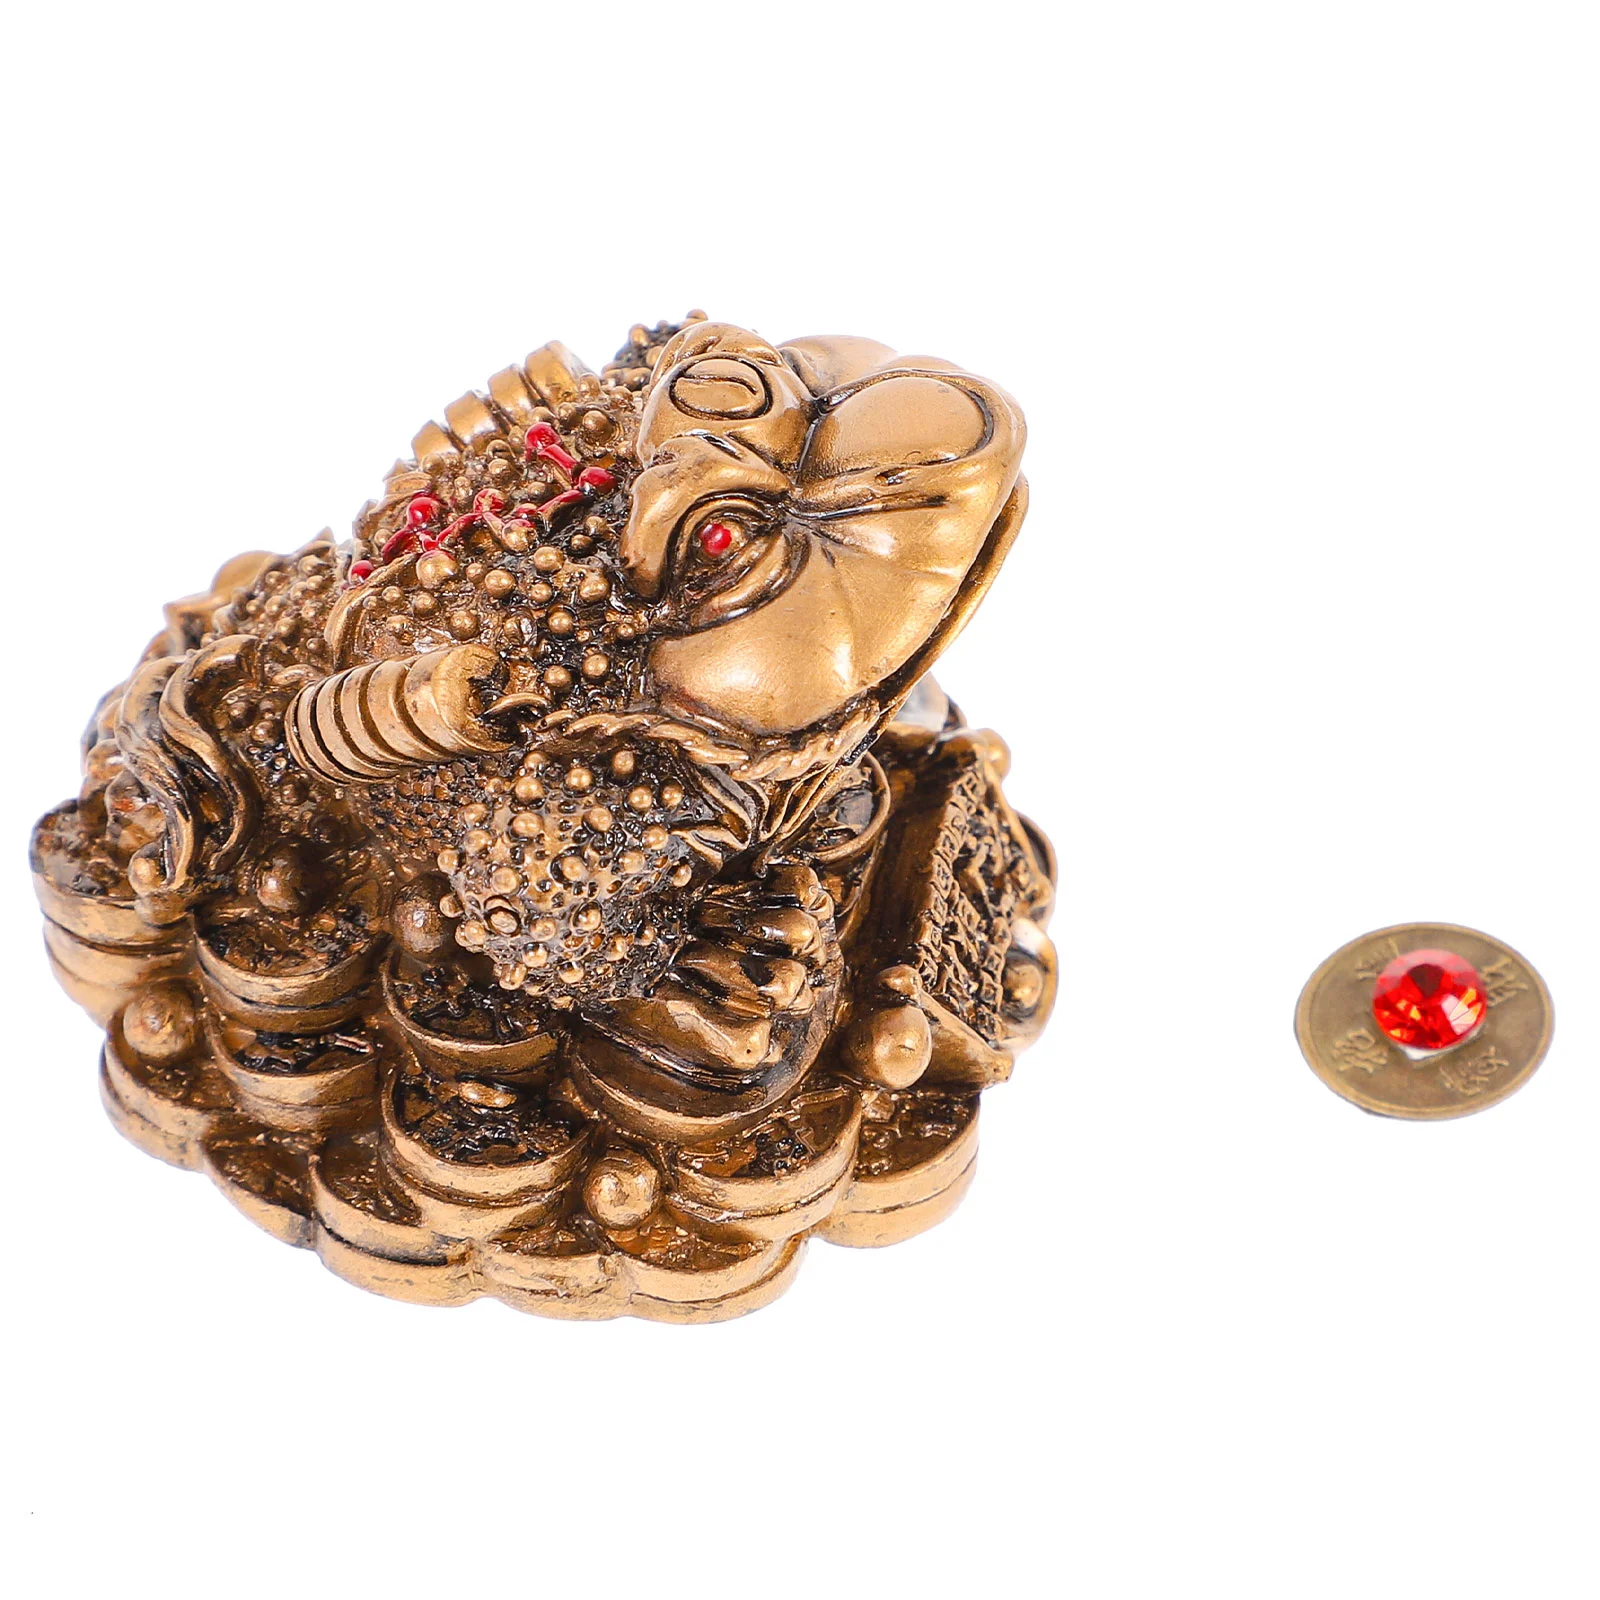 

Statue Toad Frog Legged Three Animal Chinese Wealth Fortune Sculpture Protection Bookshelf Figurines Lucky Money Igurines